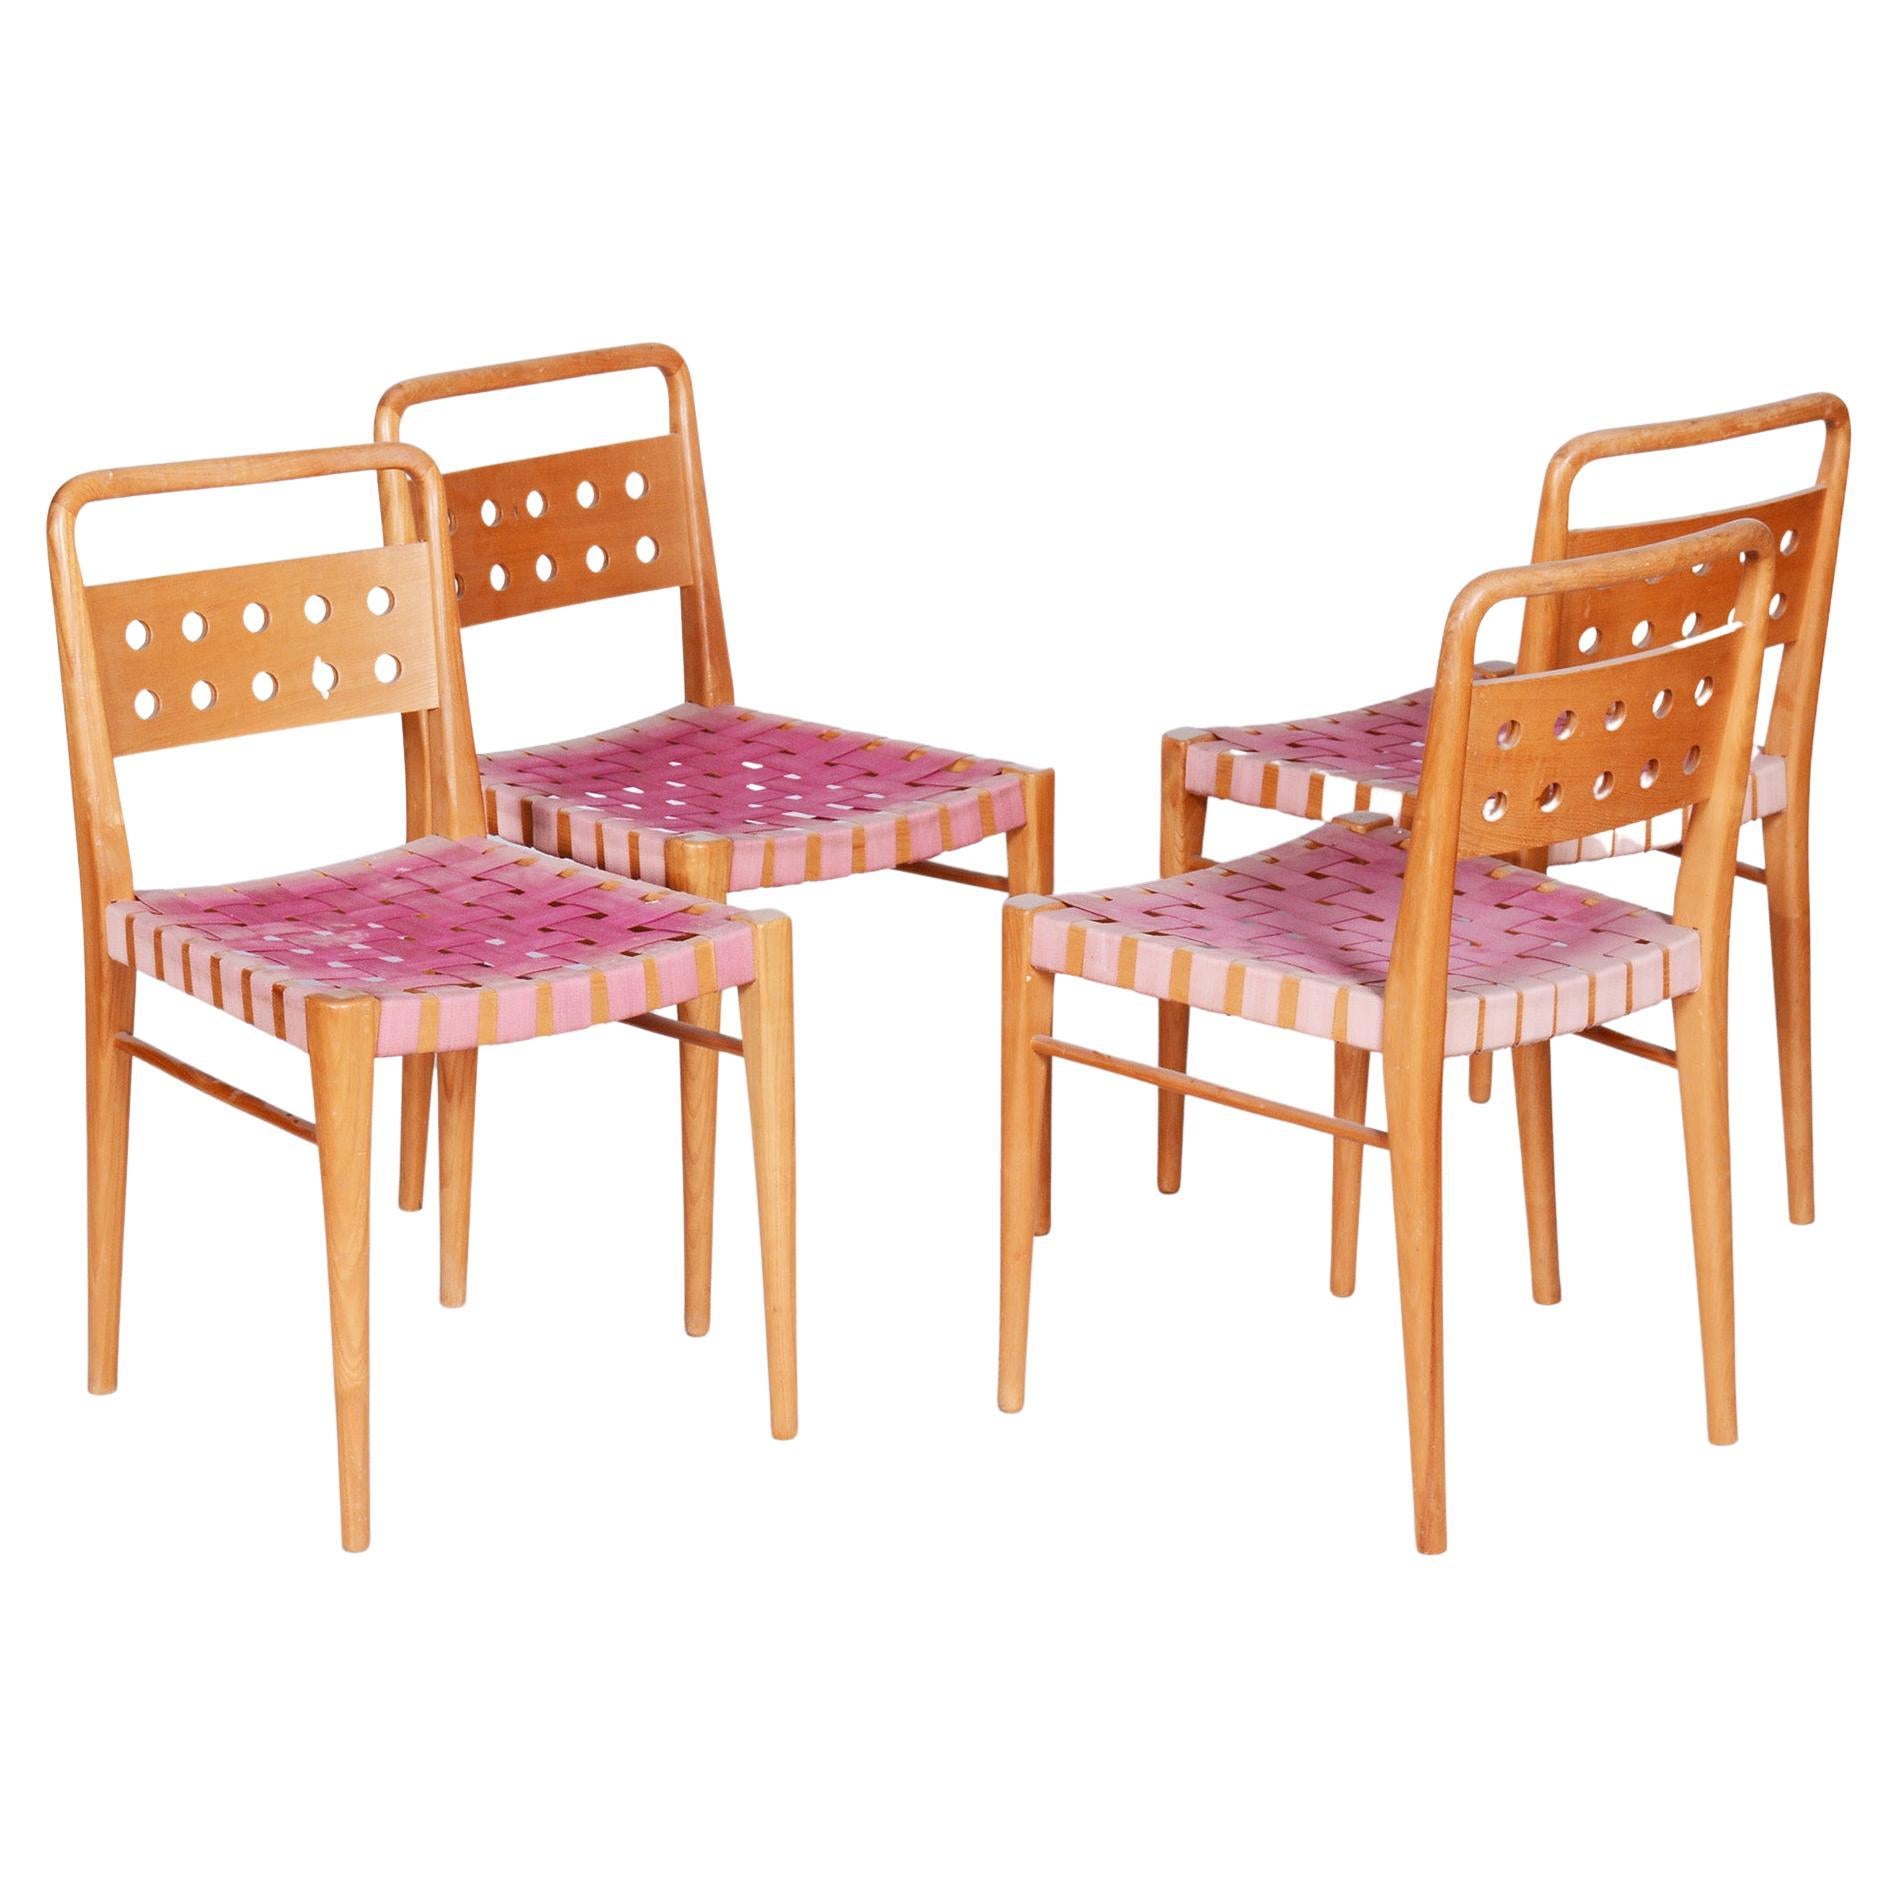 Set of Four Midcentury Ash Dining Chairs, Original Condition, Czechia, 1950s For Sale